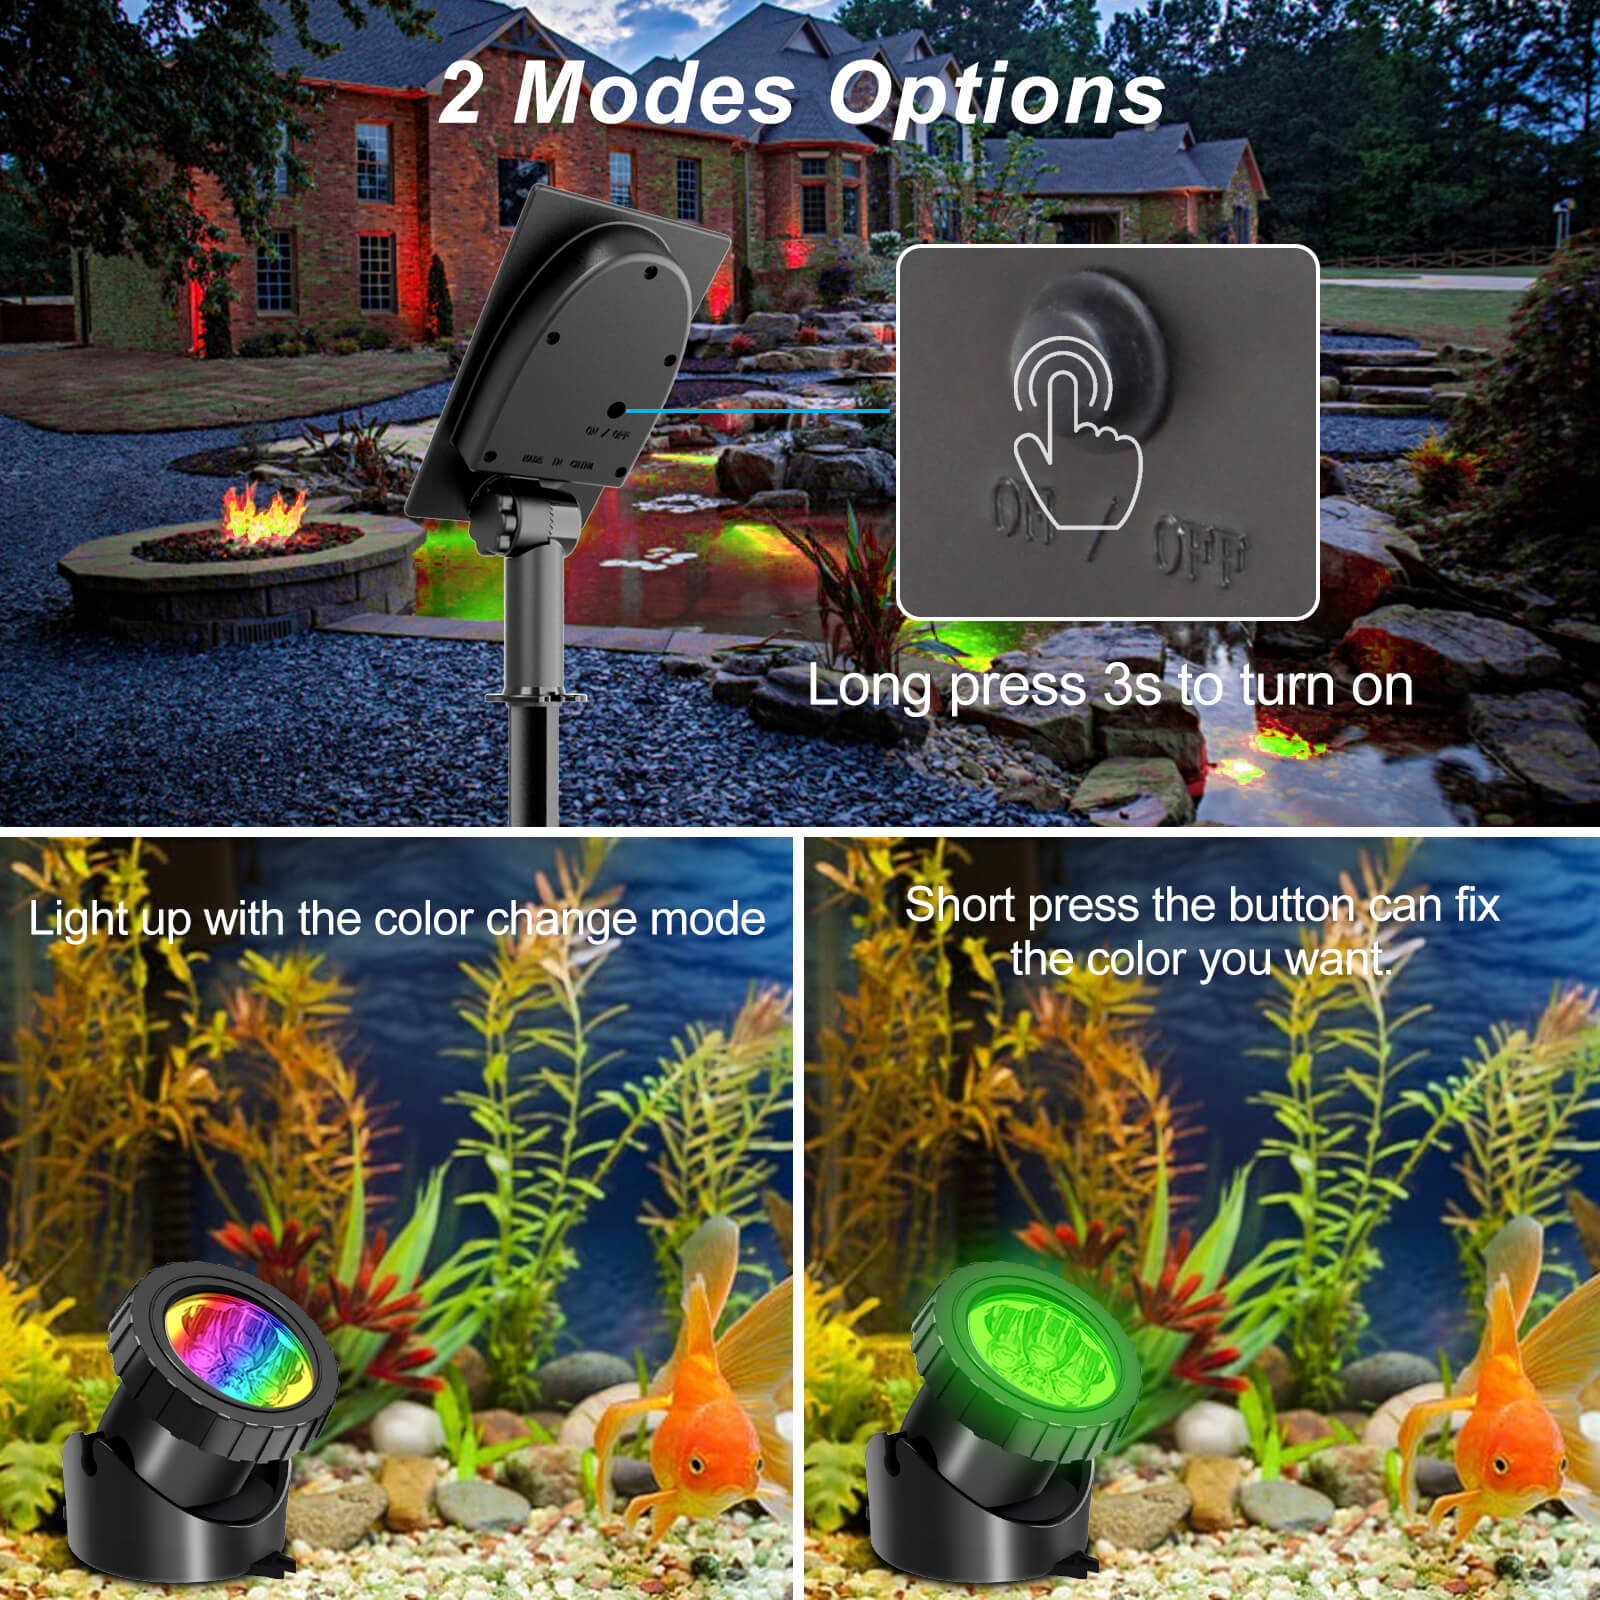 Light up with the coloir change mode, shorrt press the button can fix the color your want.